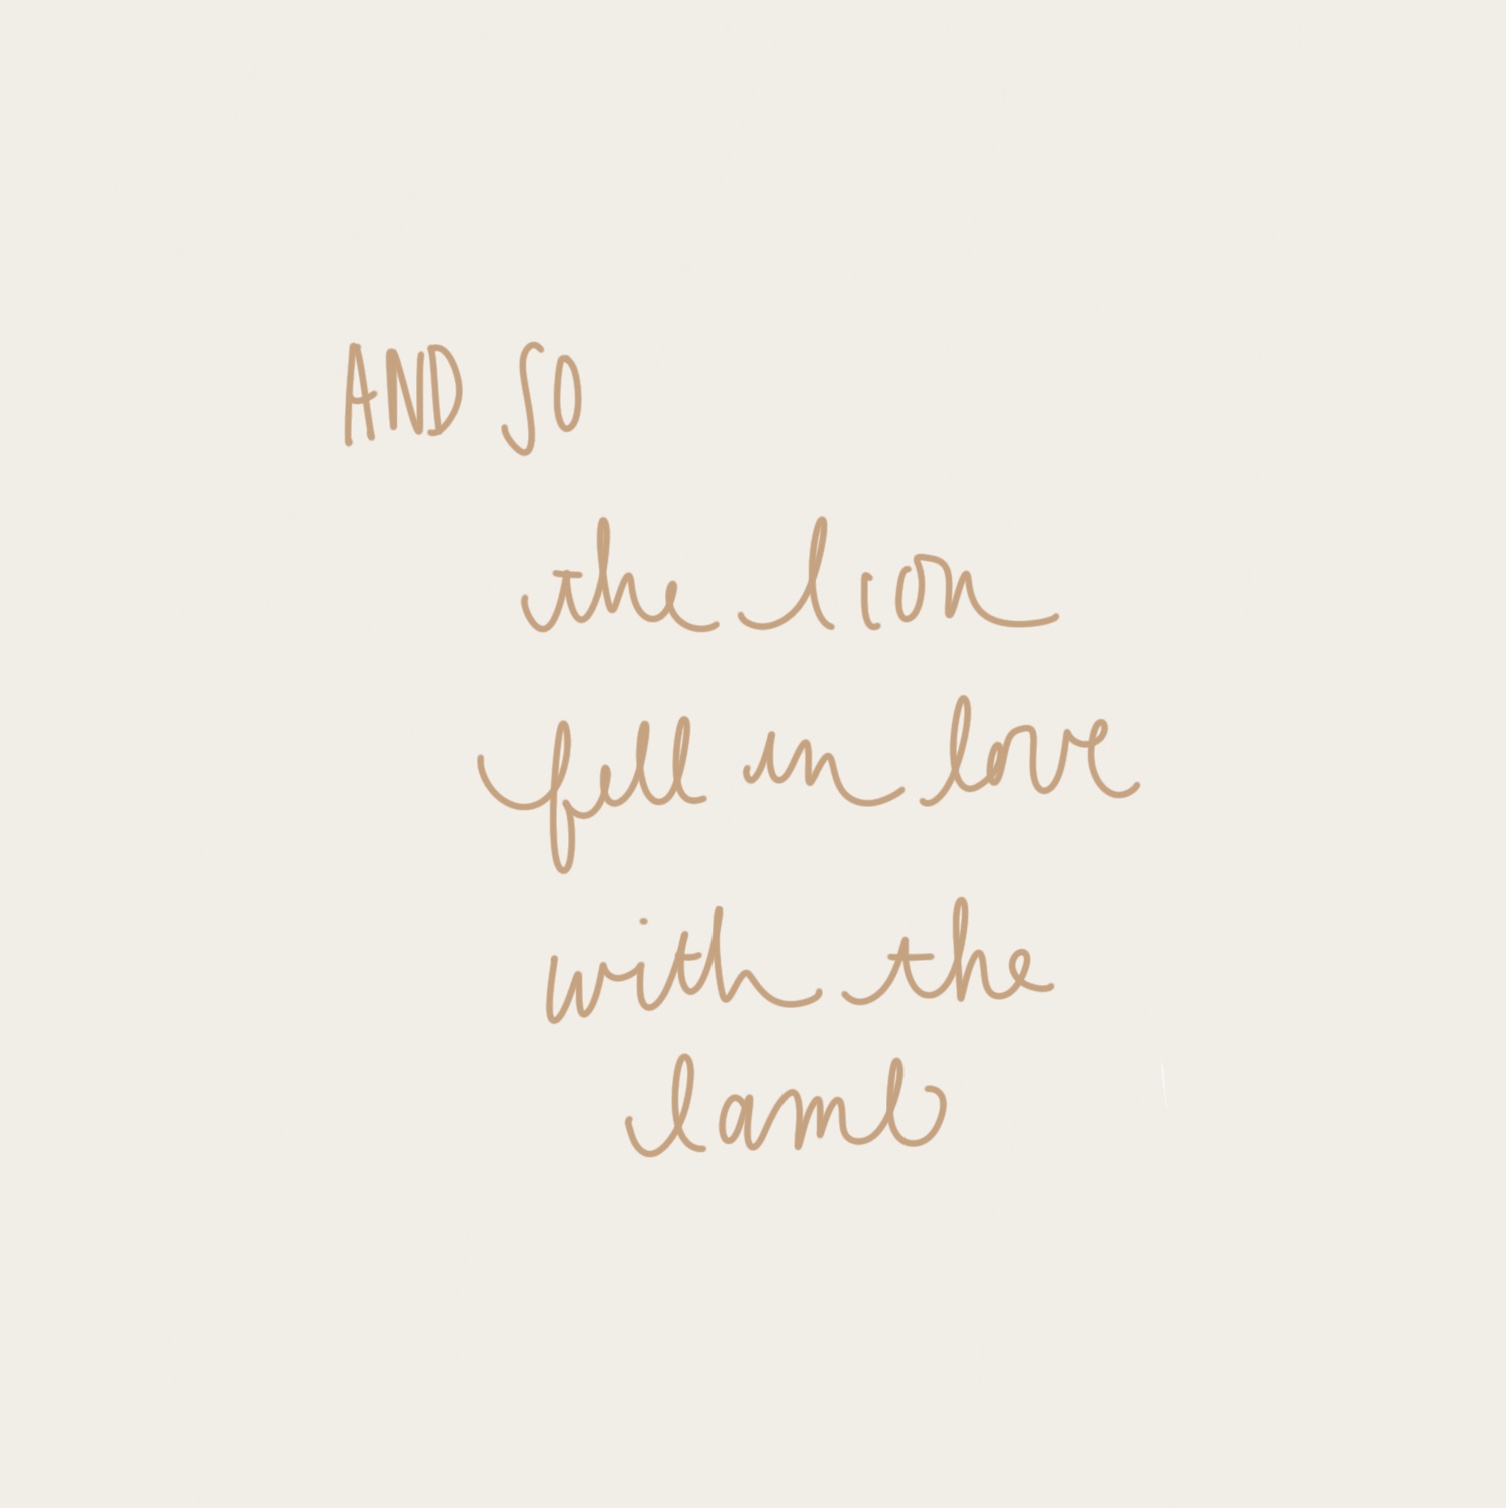 and so the lion fell in love with the lamb